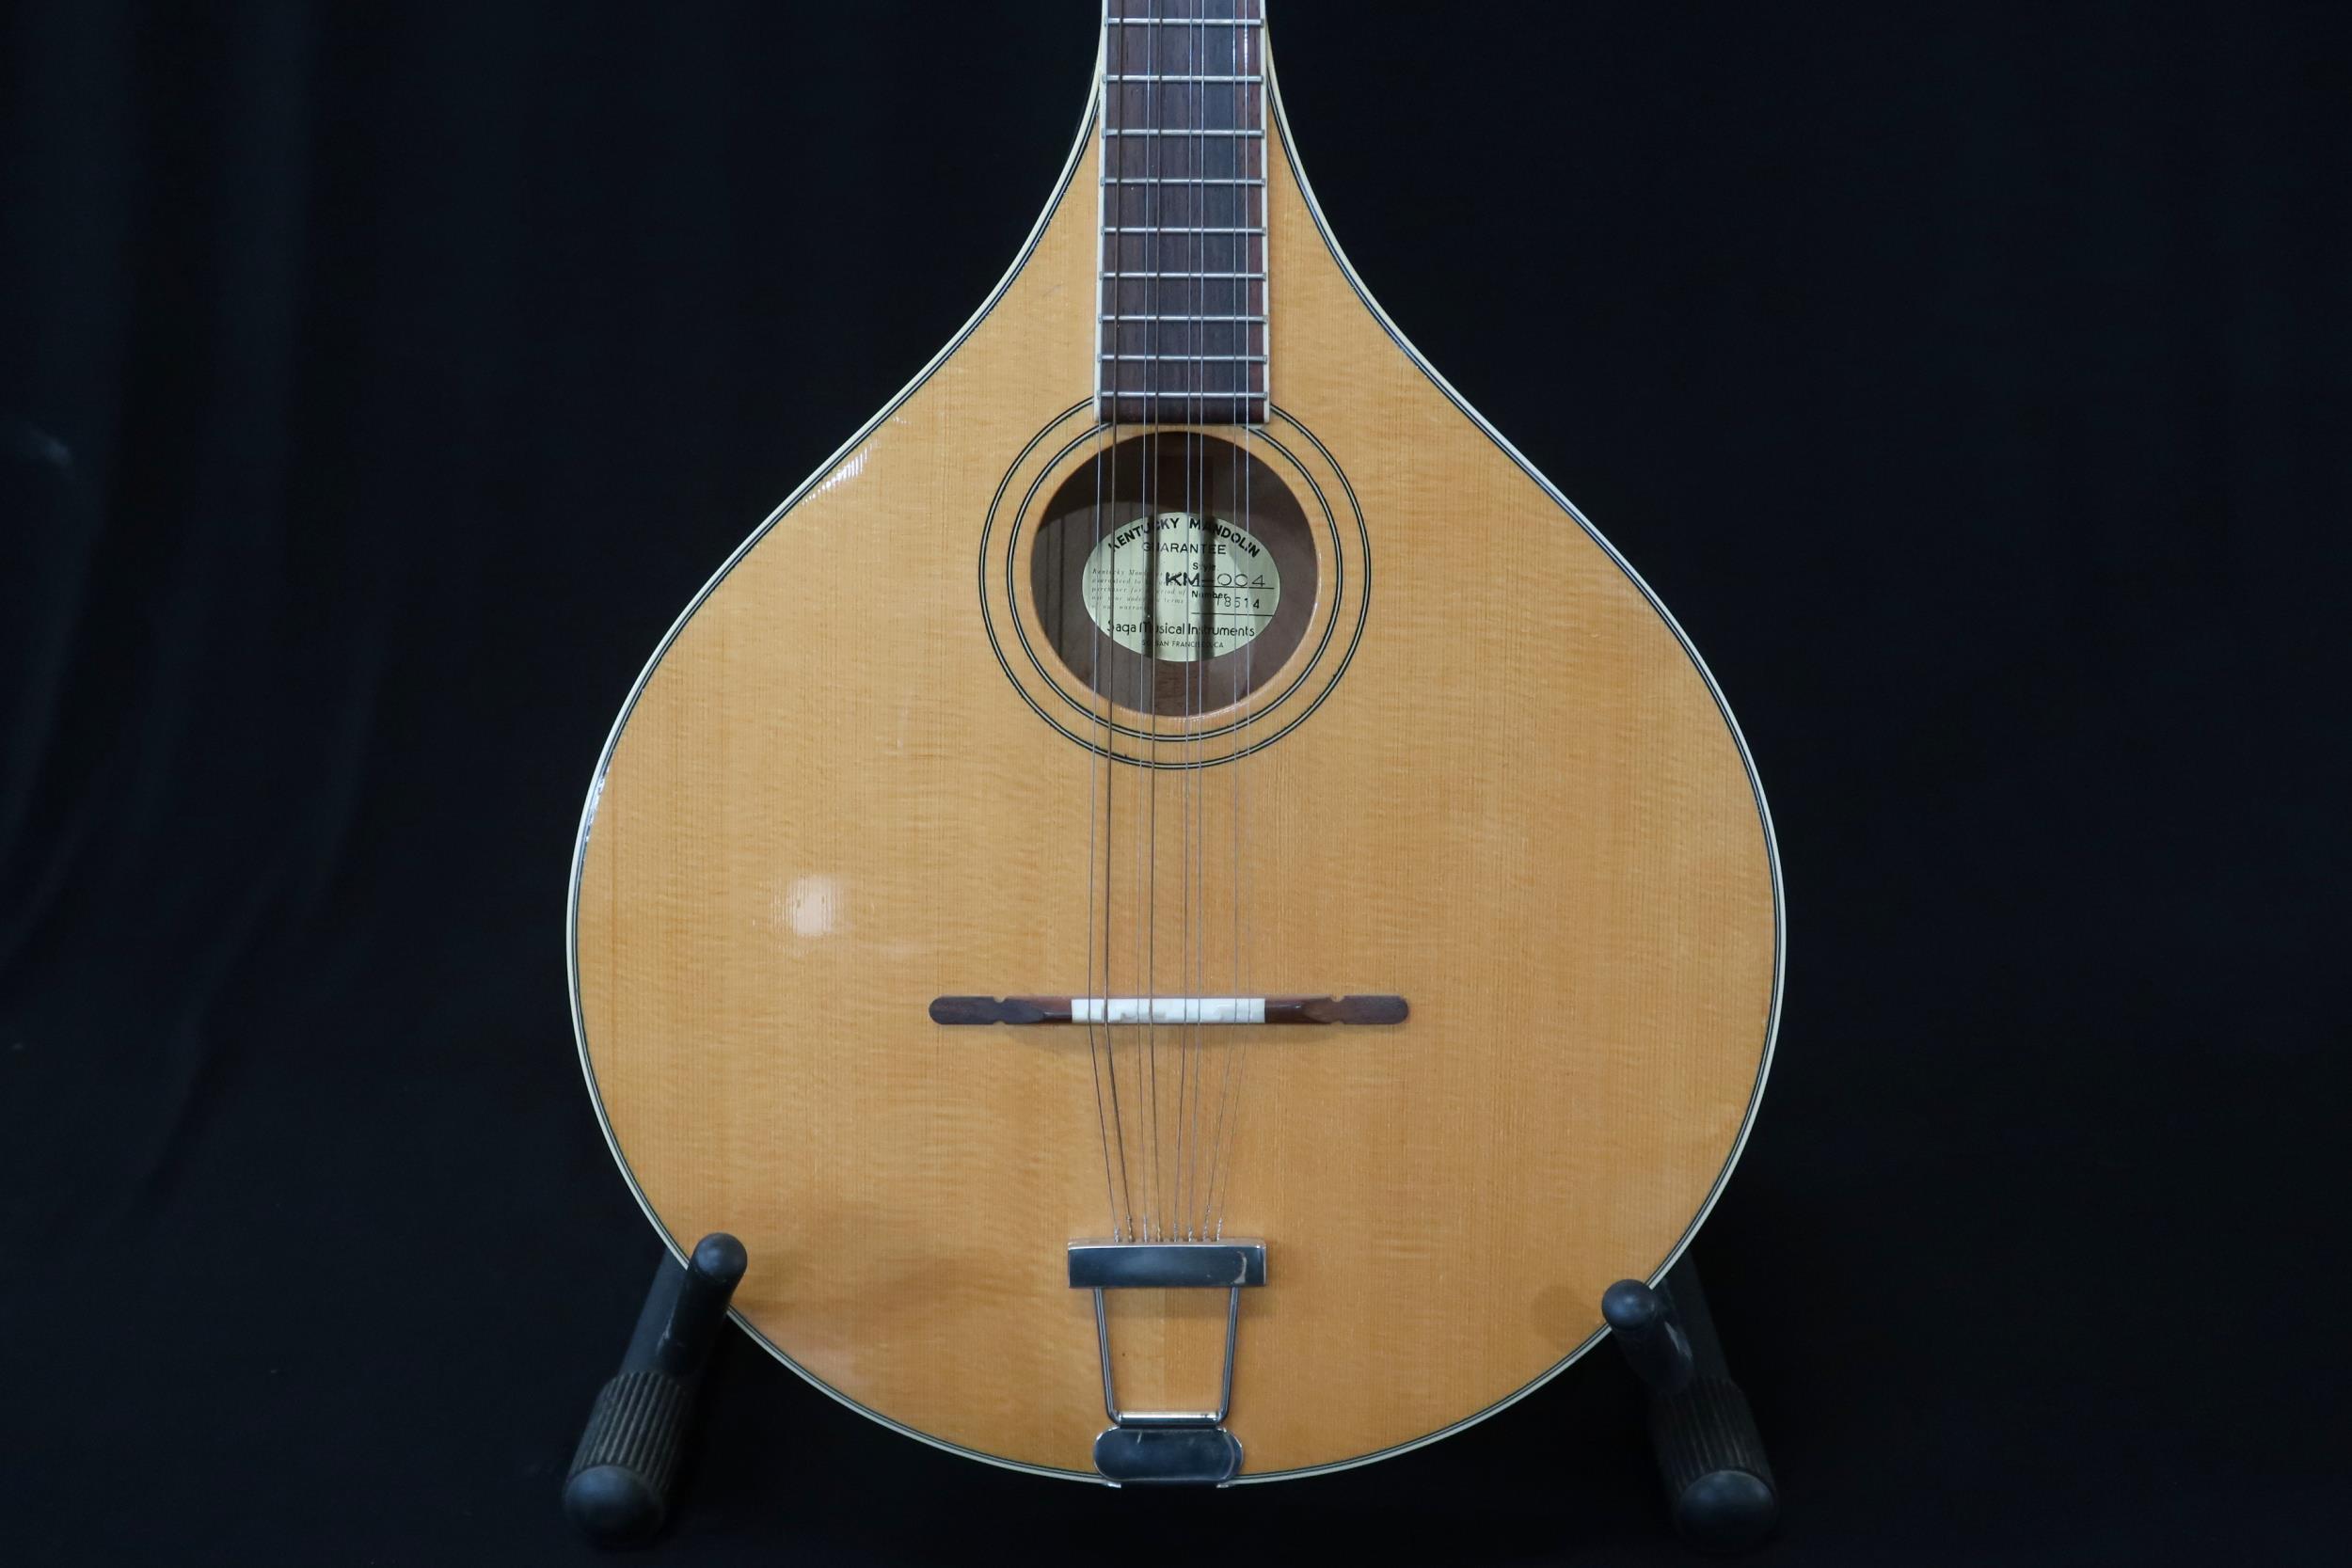 A Kentucky bouzouki mandolin 24 frets model KM-004 serial number 18514 bearing label to the interior - Image 3 of 16